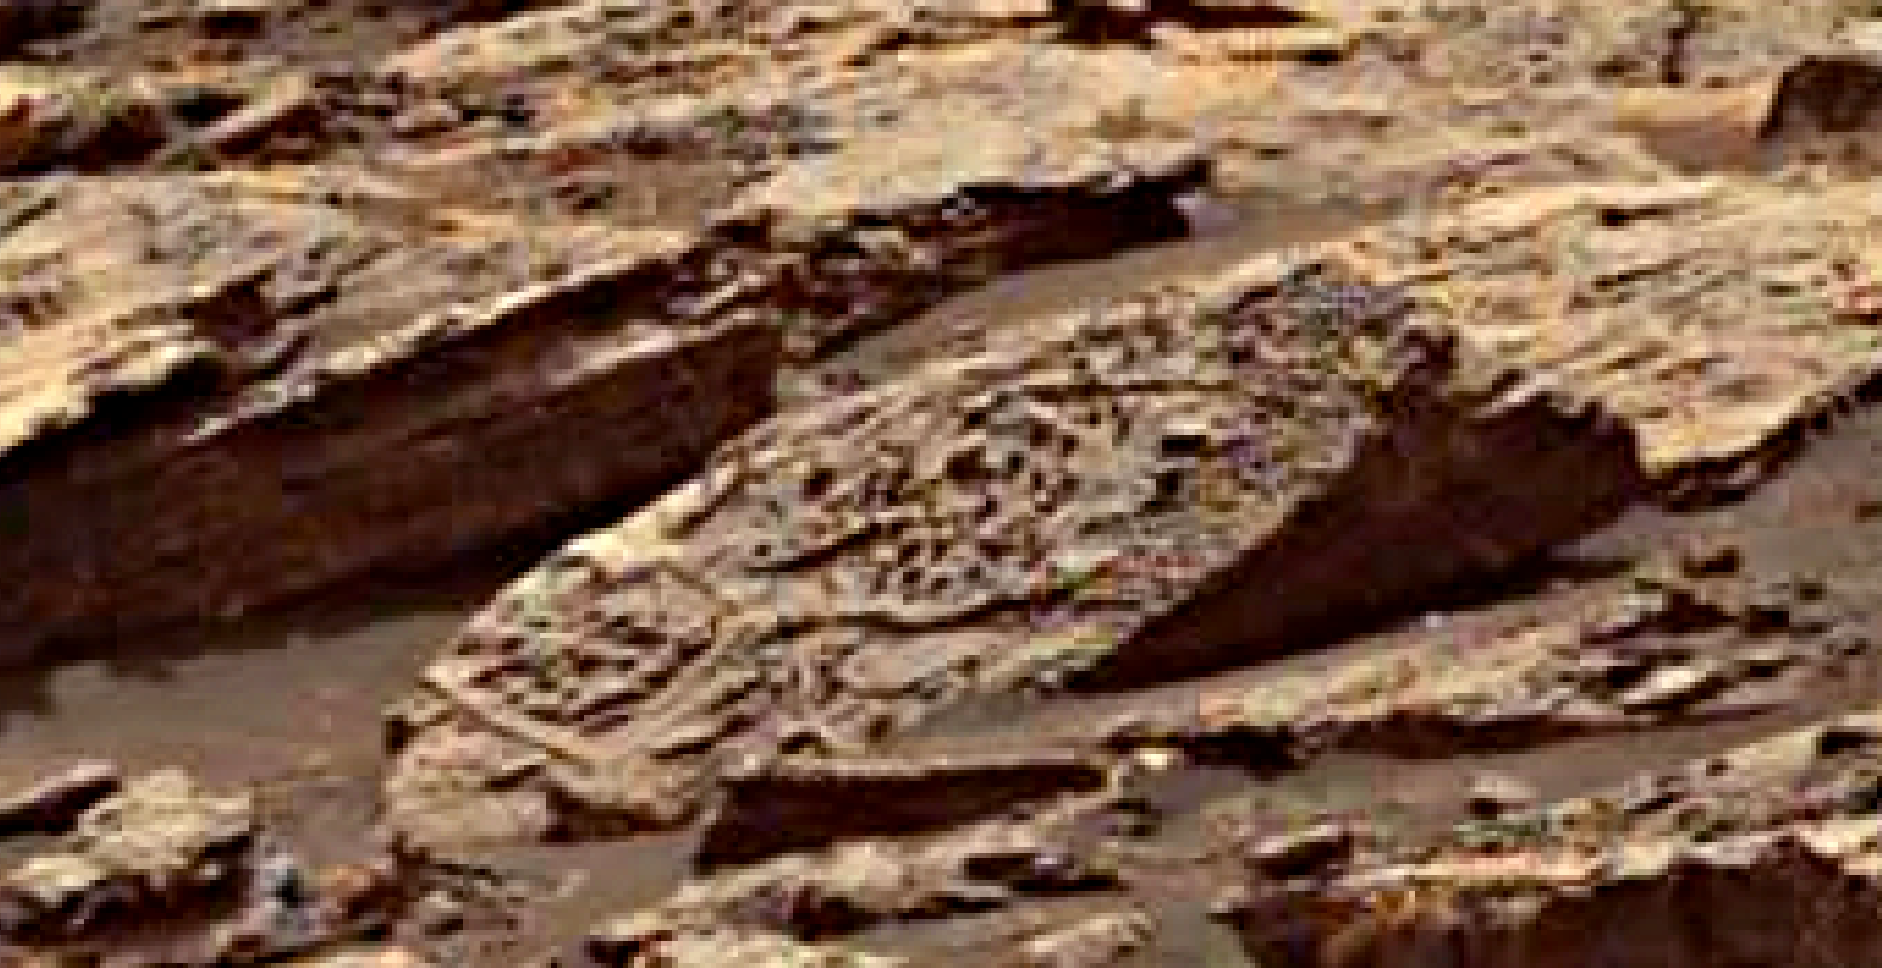 mars-sol-1485-anomaly-artifacts-8-was-life-on-mars